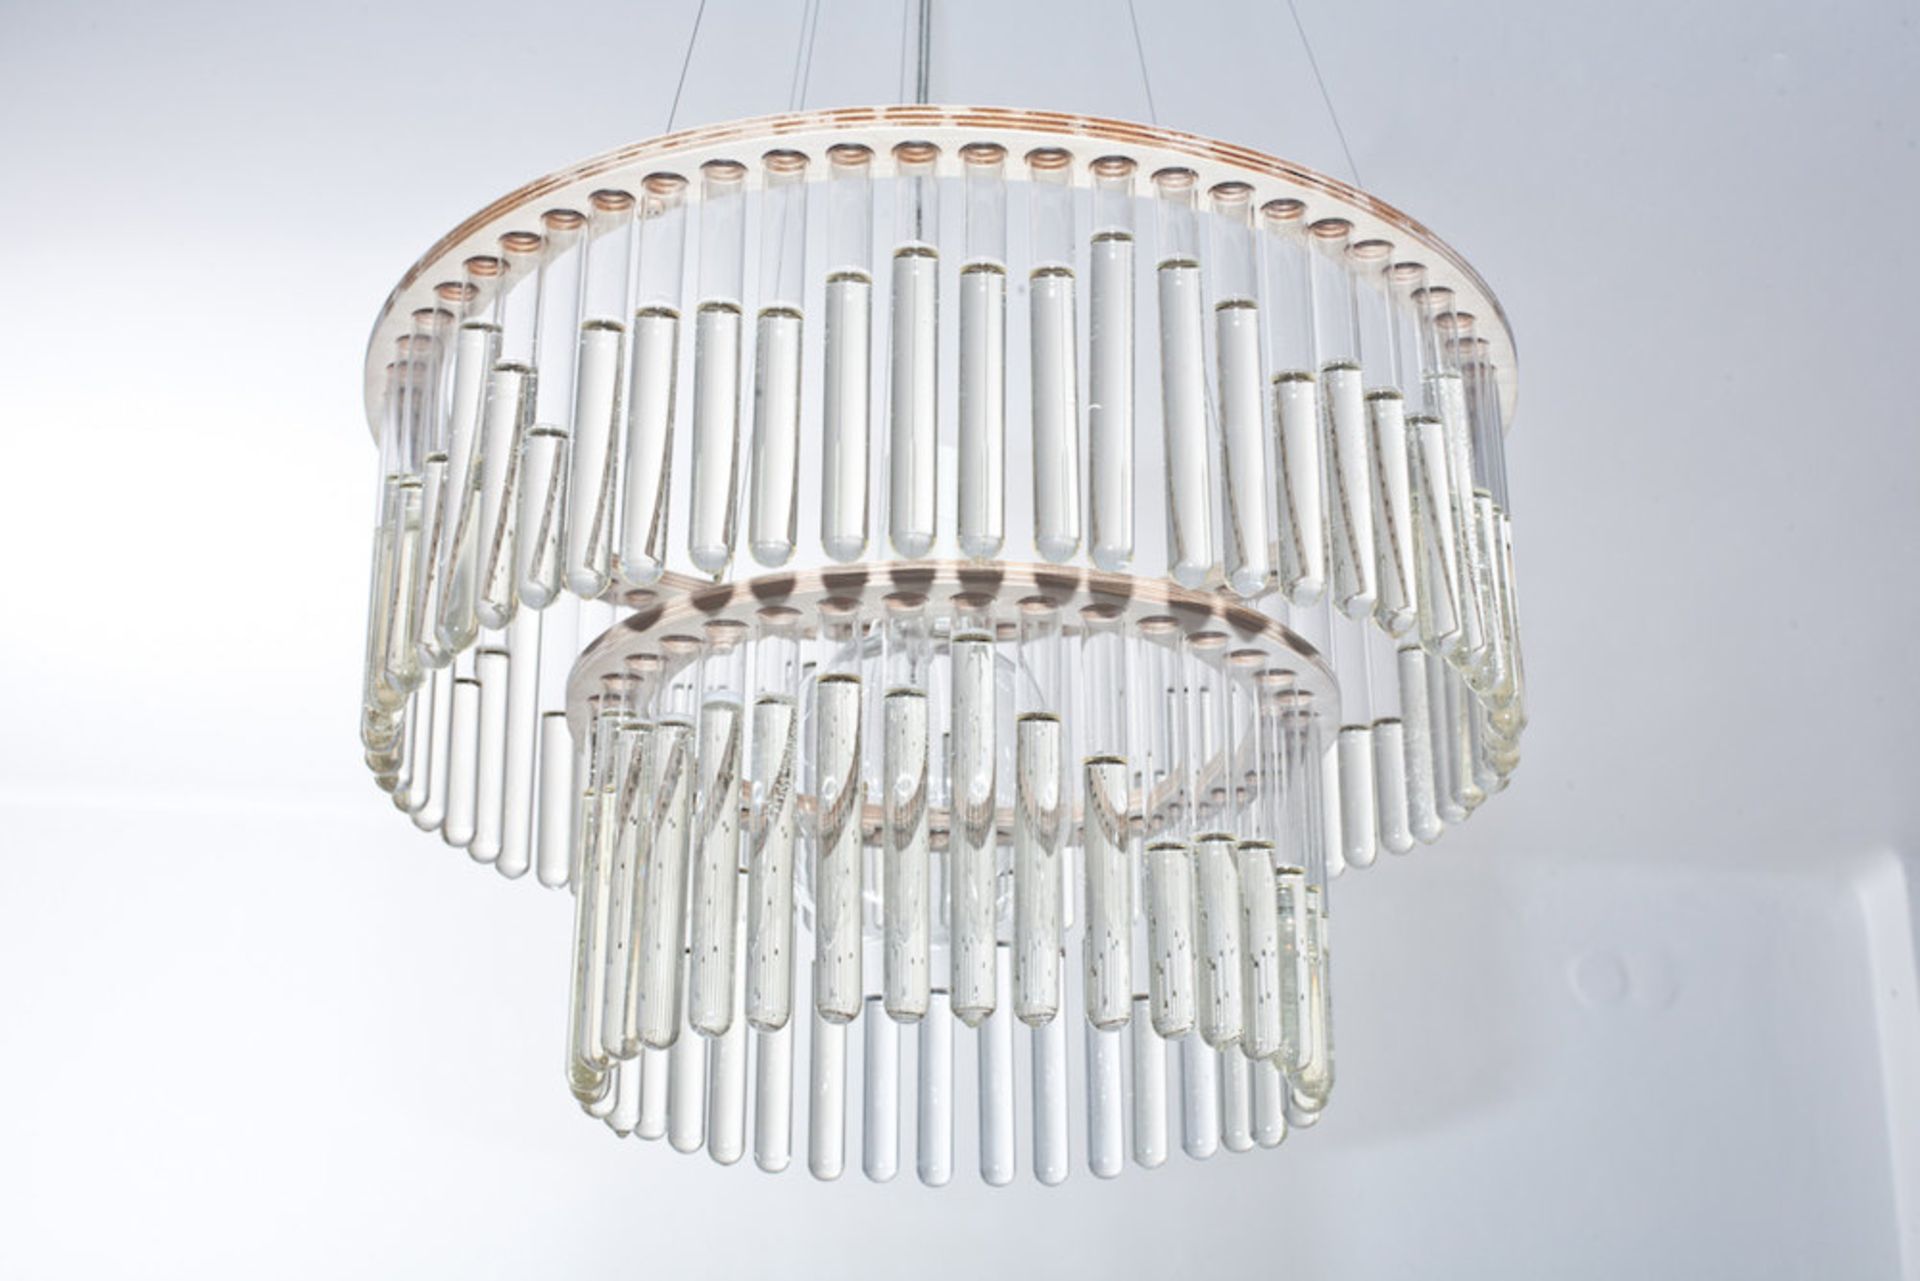 Test Tube 2 Ring Pendant 85x50cm-Nat(UK) A Unqiue And Unusual Lighting Piece Sure To Be A